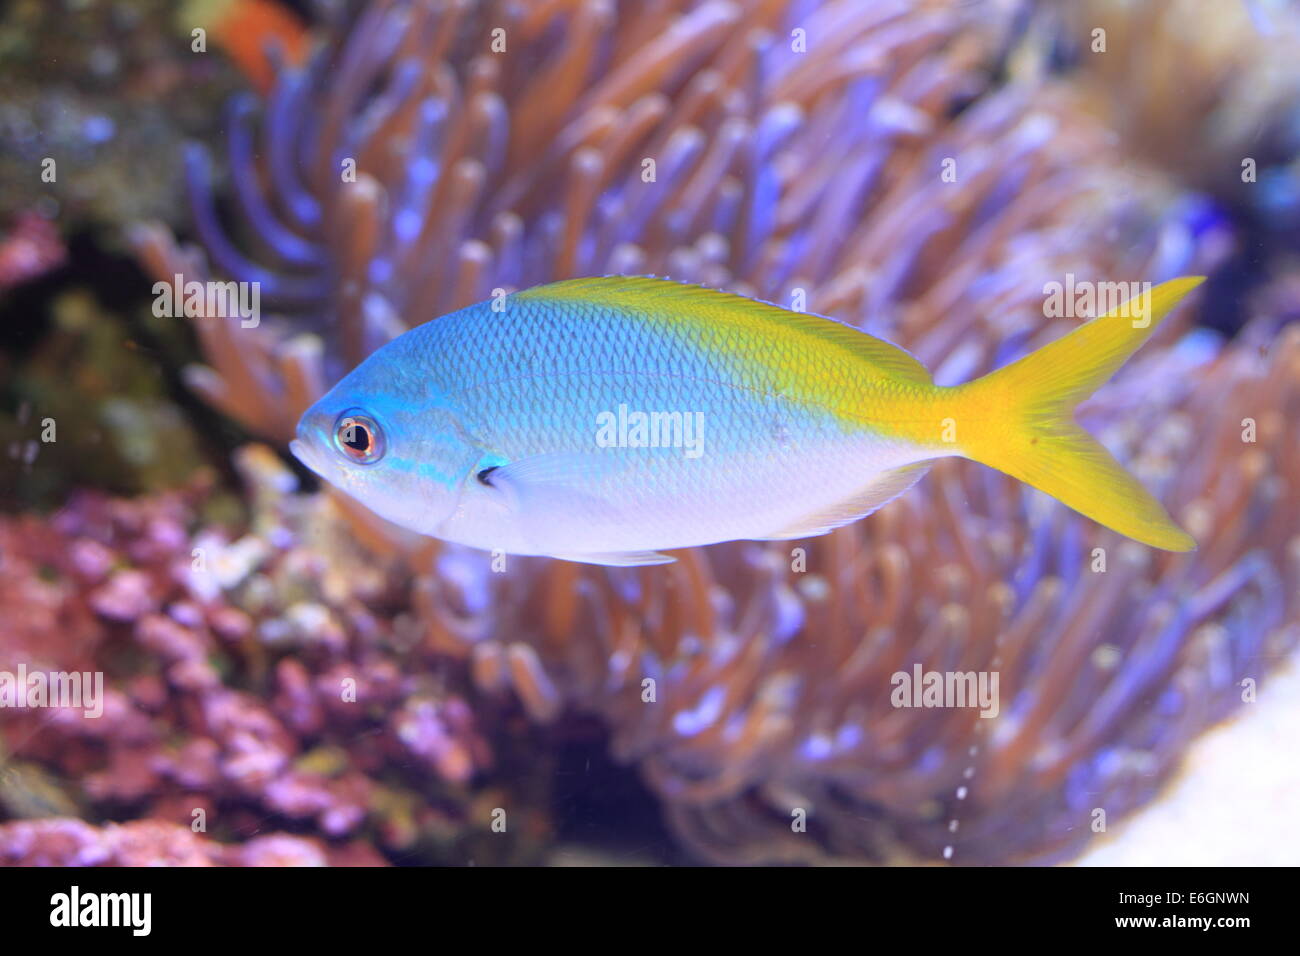 Yellow and blueback fusilier or Redfin fusilier (Caesio teres) in Japan Stock Photo